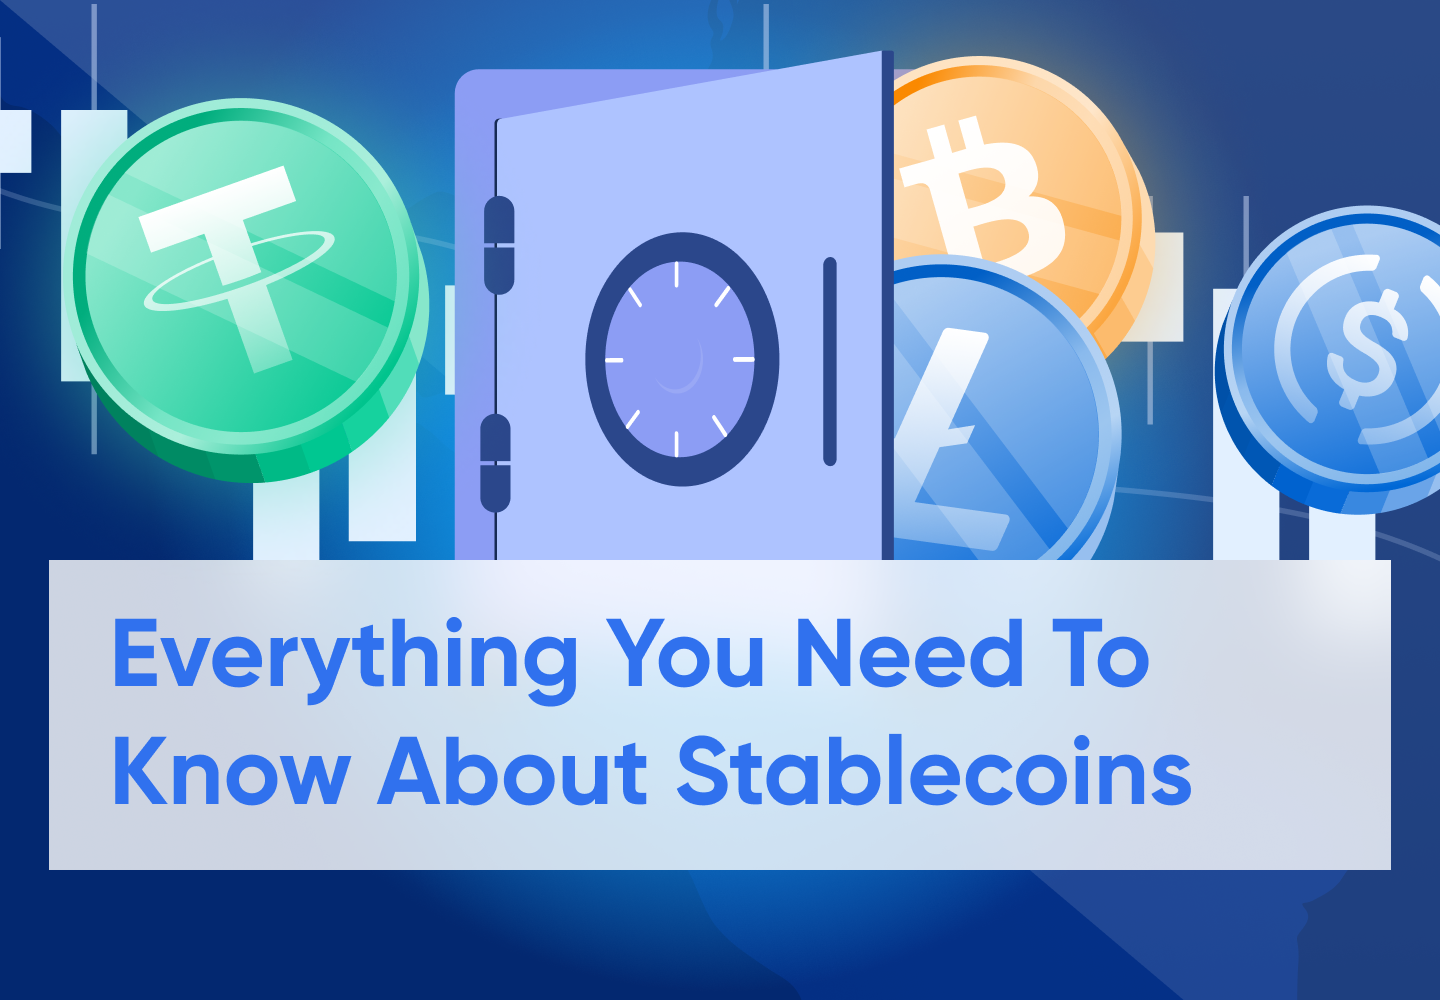 Are Stablecoins Really Safe?